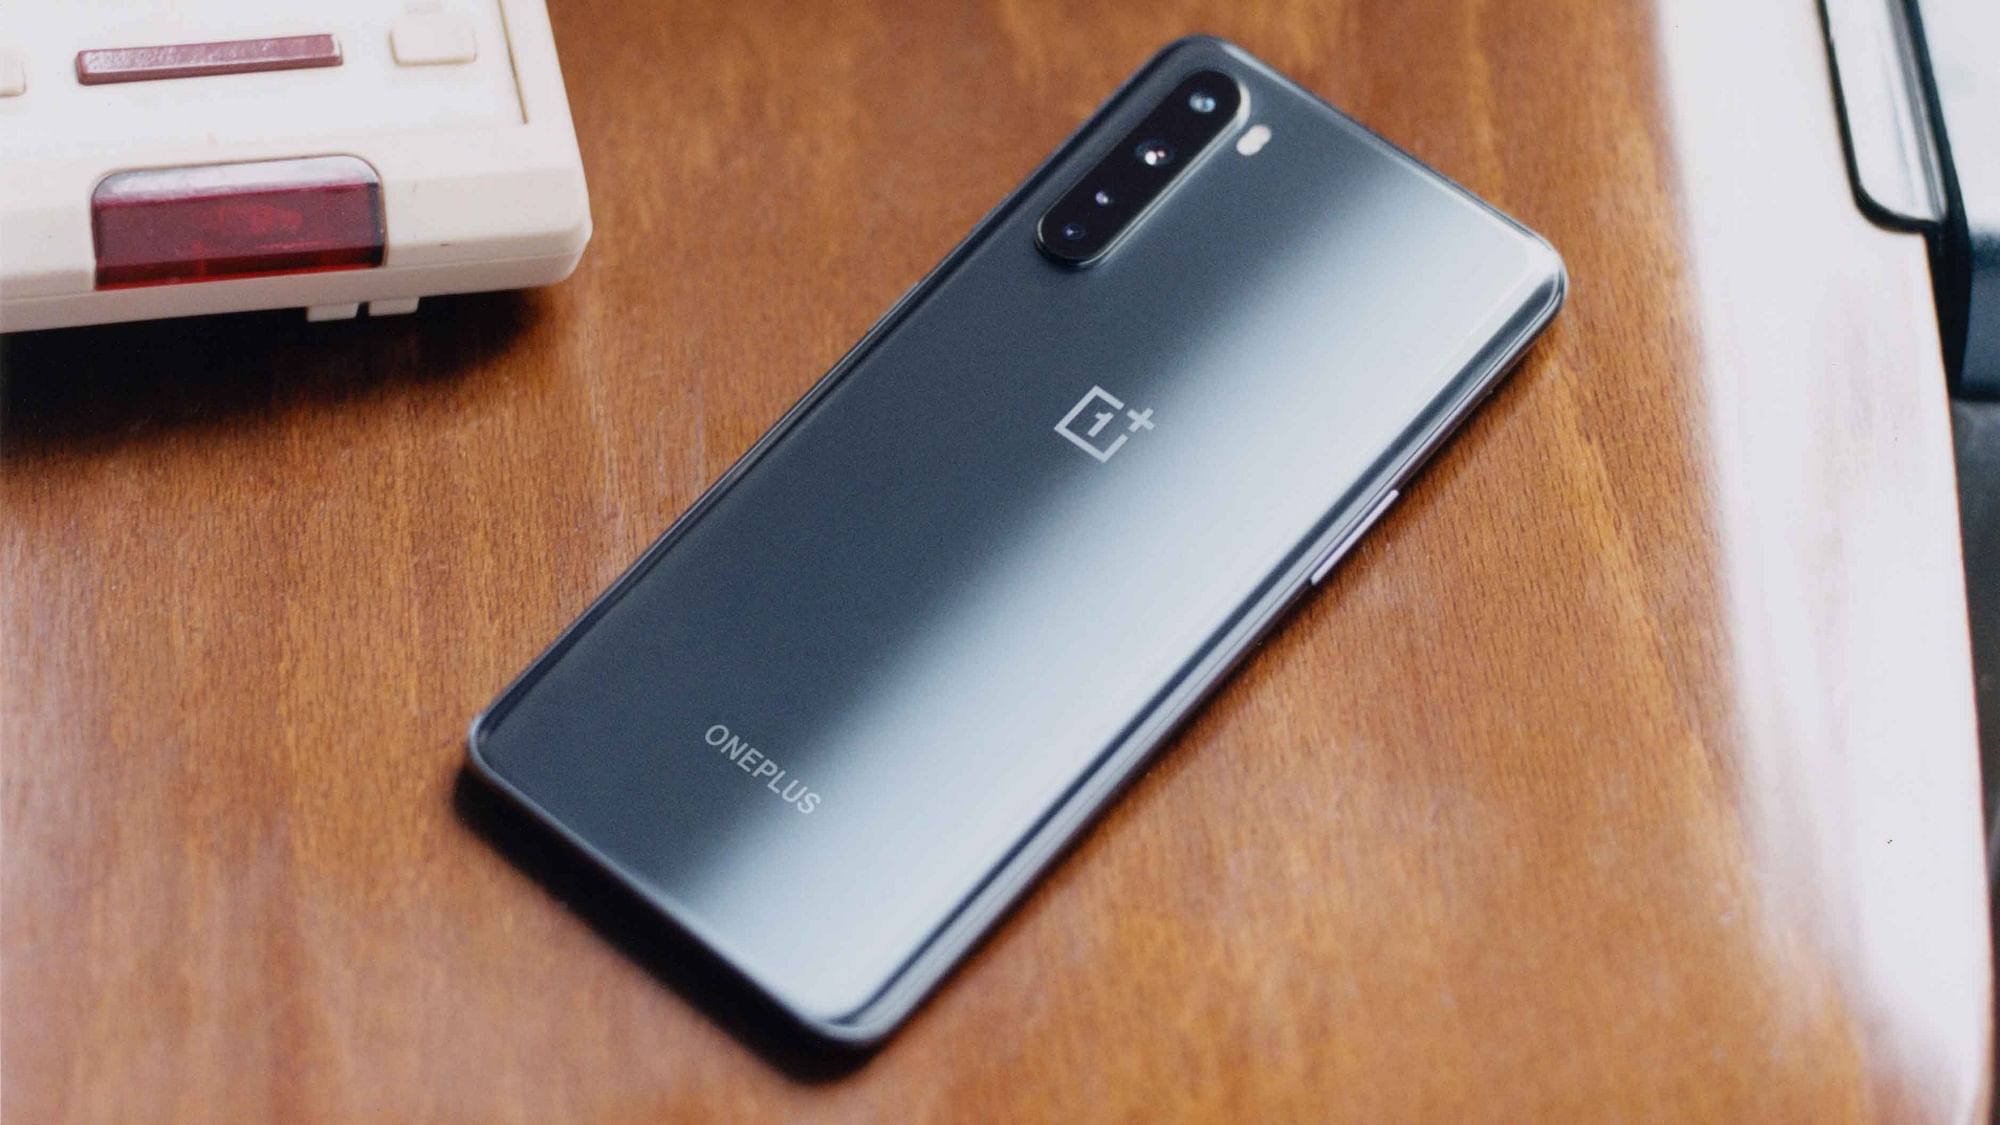 Oneplus Nord Ce 5g Price In India Oneplus Nord Ce 5g To Launch In India On 10 June 2021 Check Price And Specifications